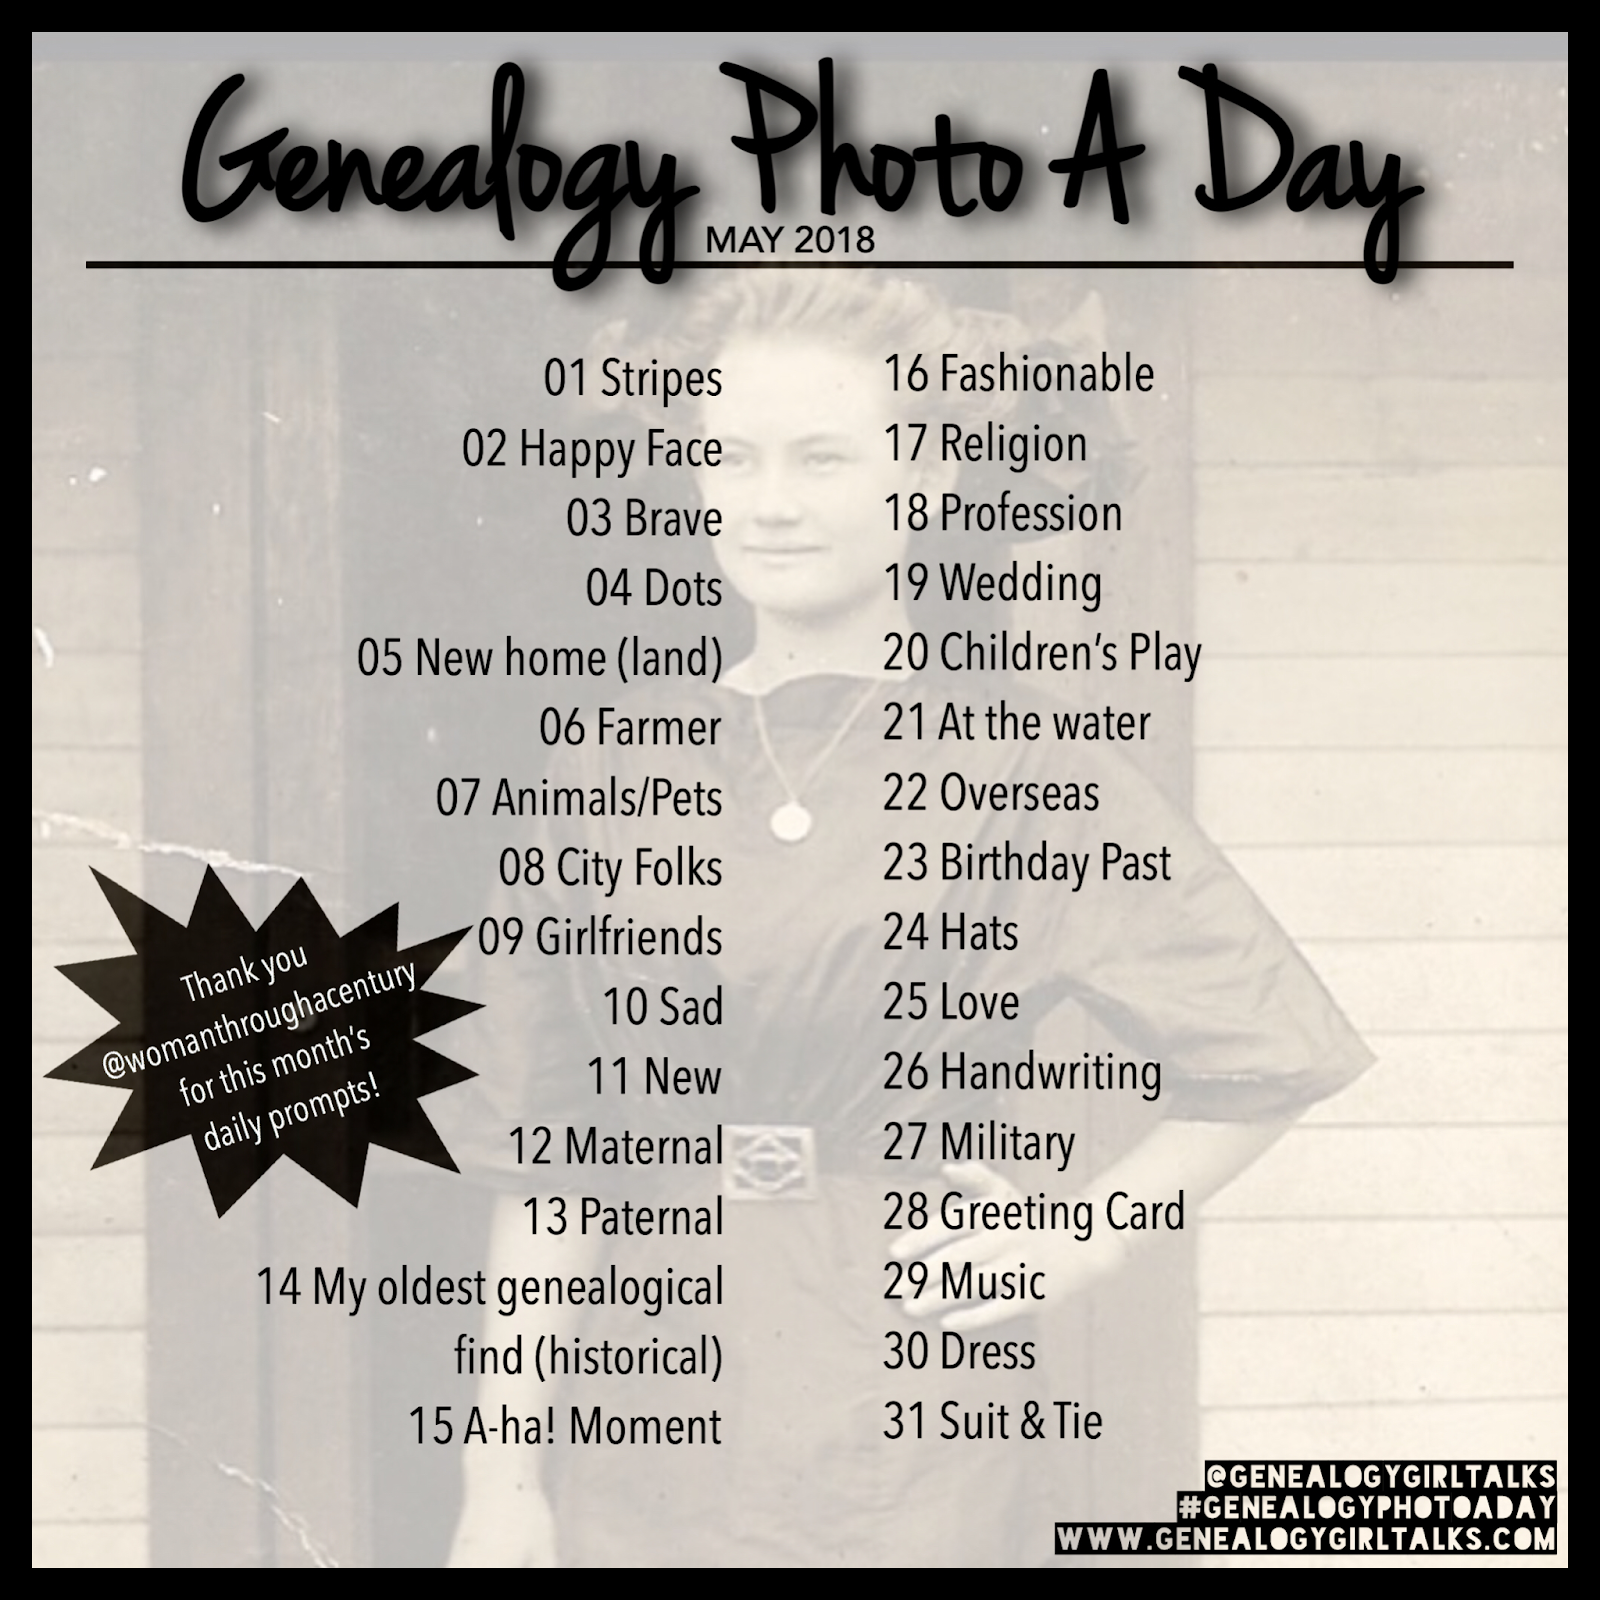 May 2018 Genealogy Photo A Day prompts with GenealogyGirlTalks.com